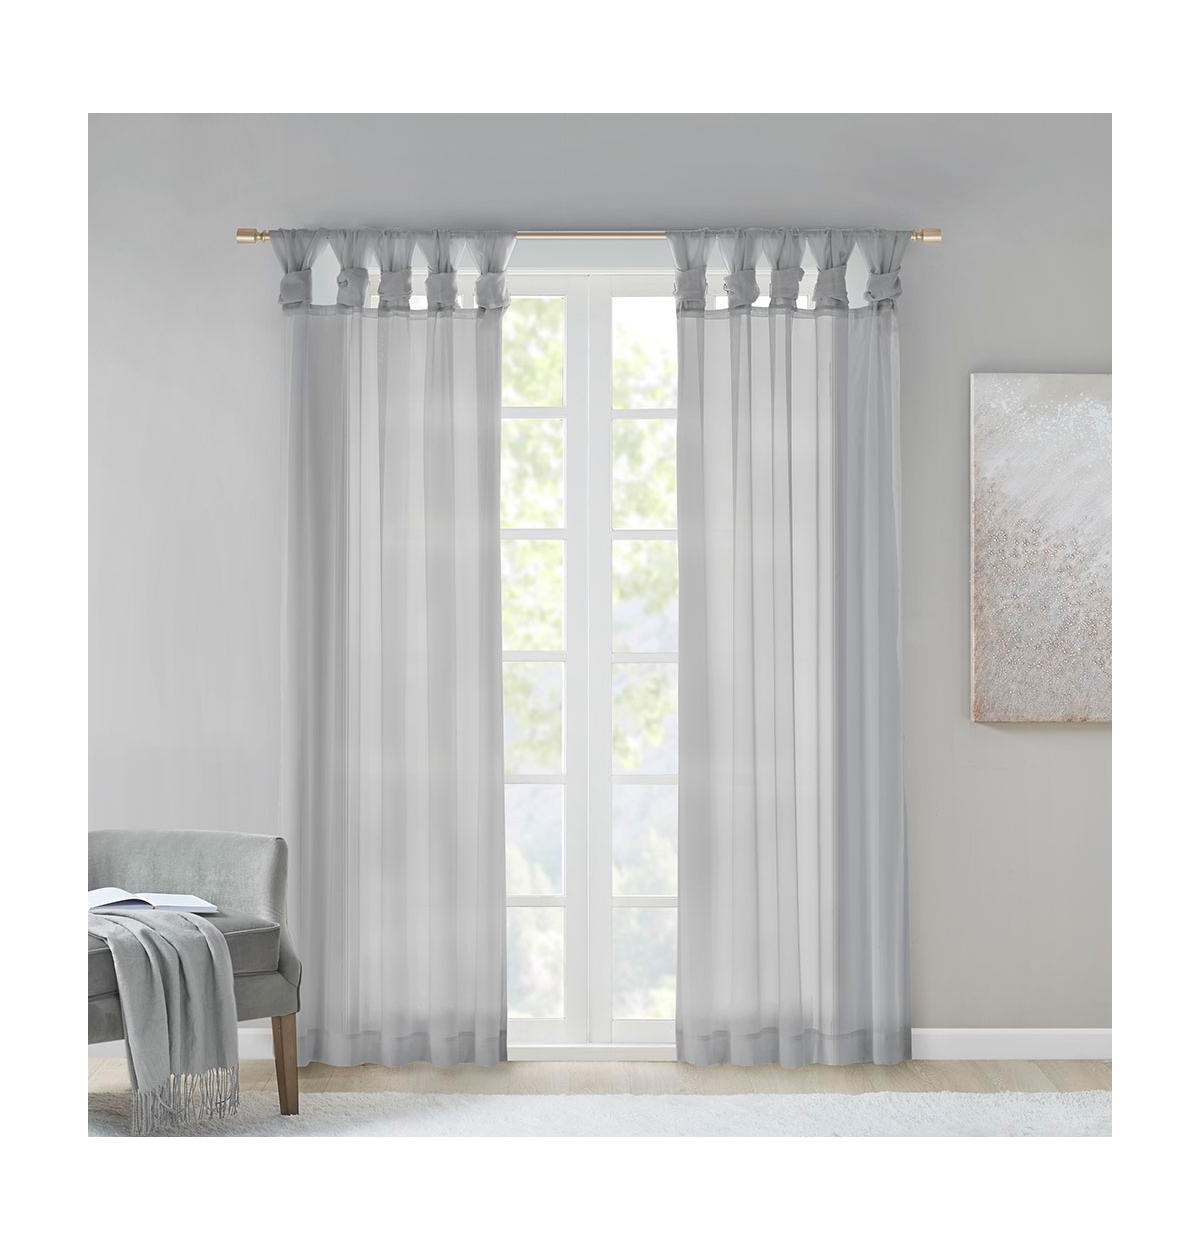 Ceres Twist Tab Voile Sheer Window Curtain Pair, 50"W x 63"L, 2 Pack - Light Grey